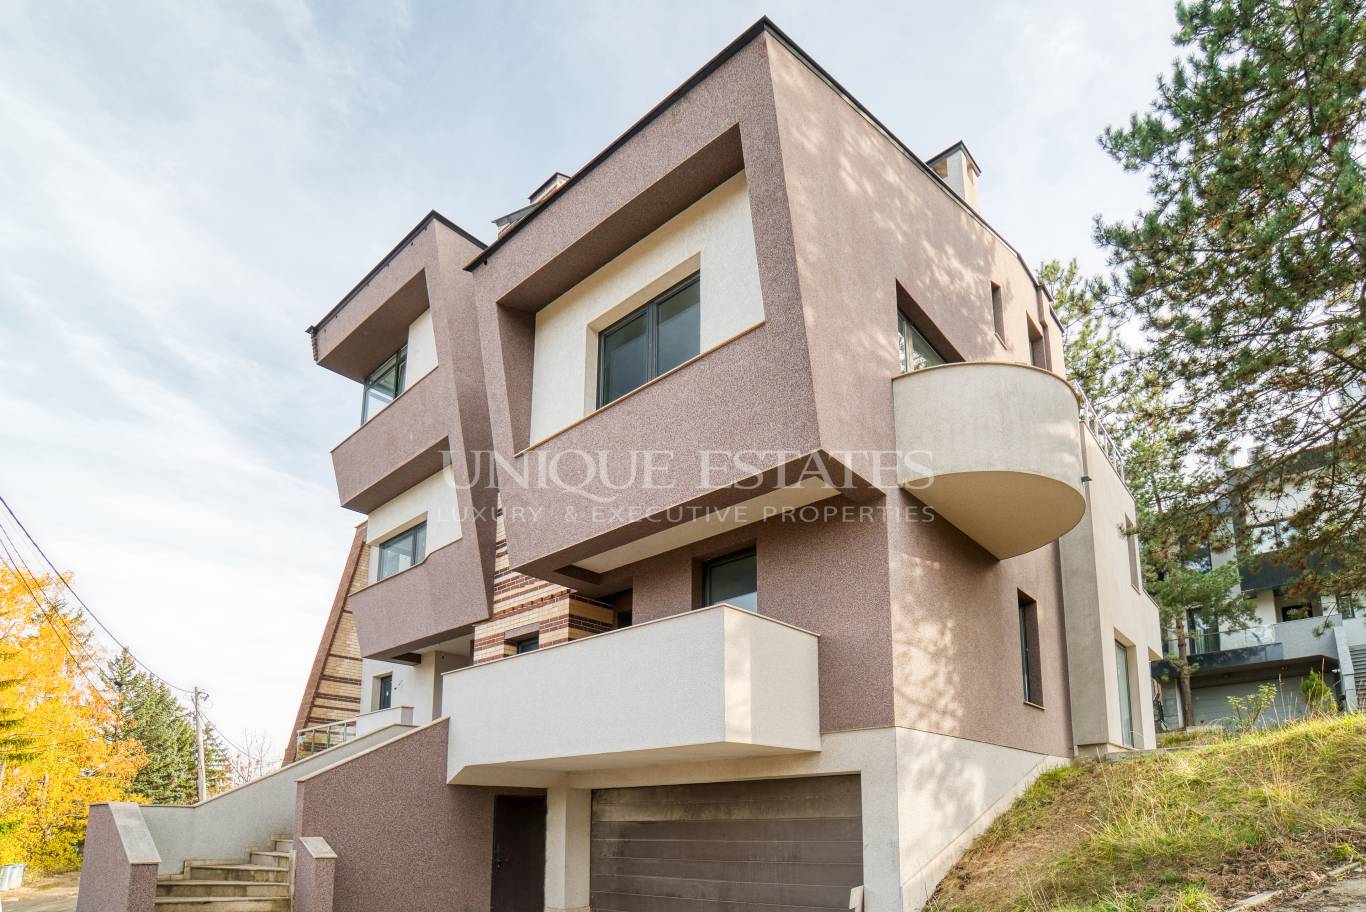 House for sale in Sofia, Gorna Banya with listing ID: K8091 - image 2